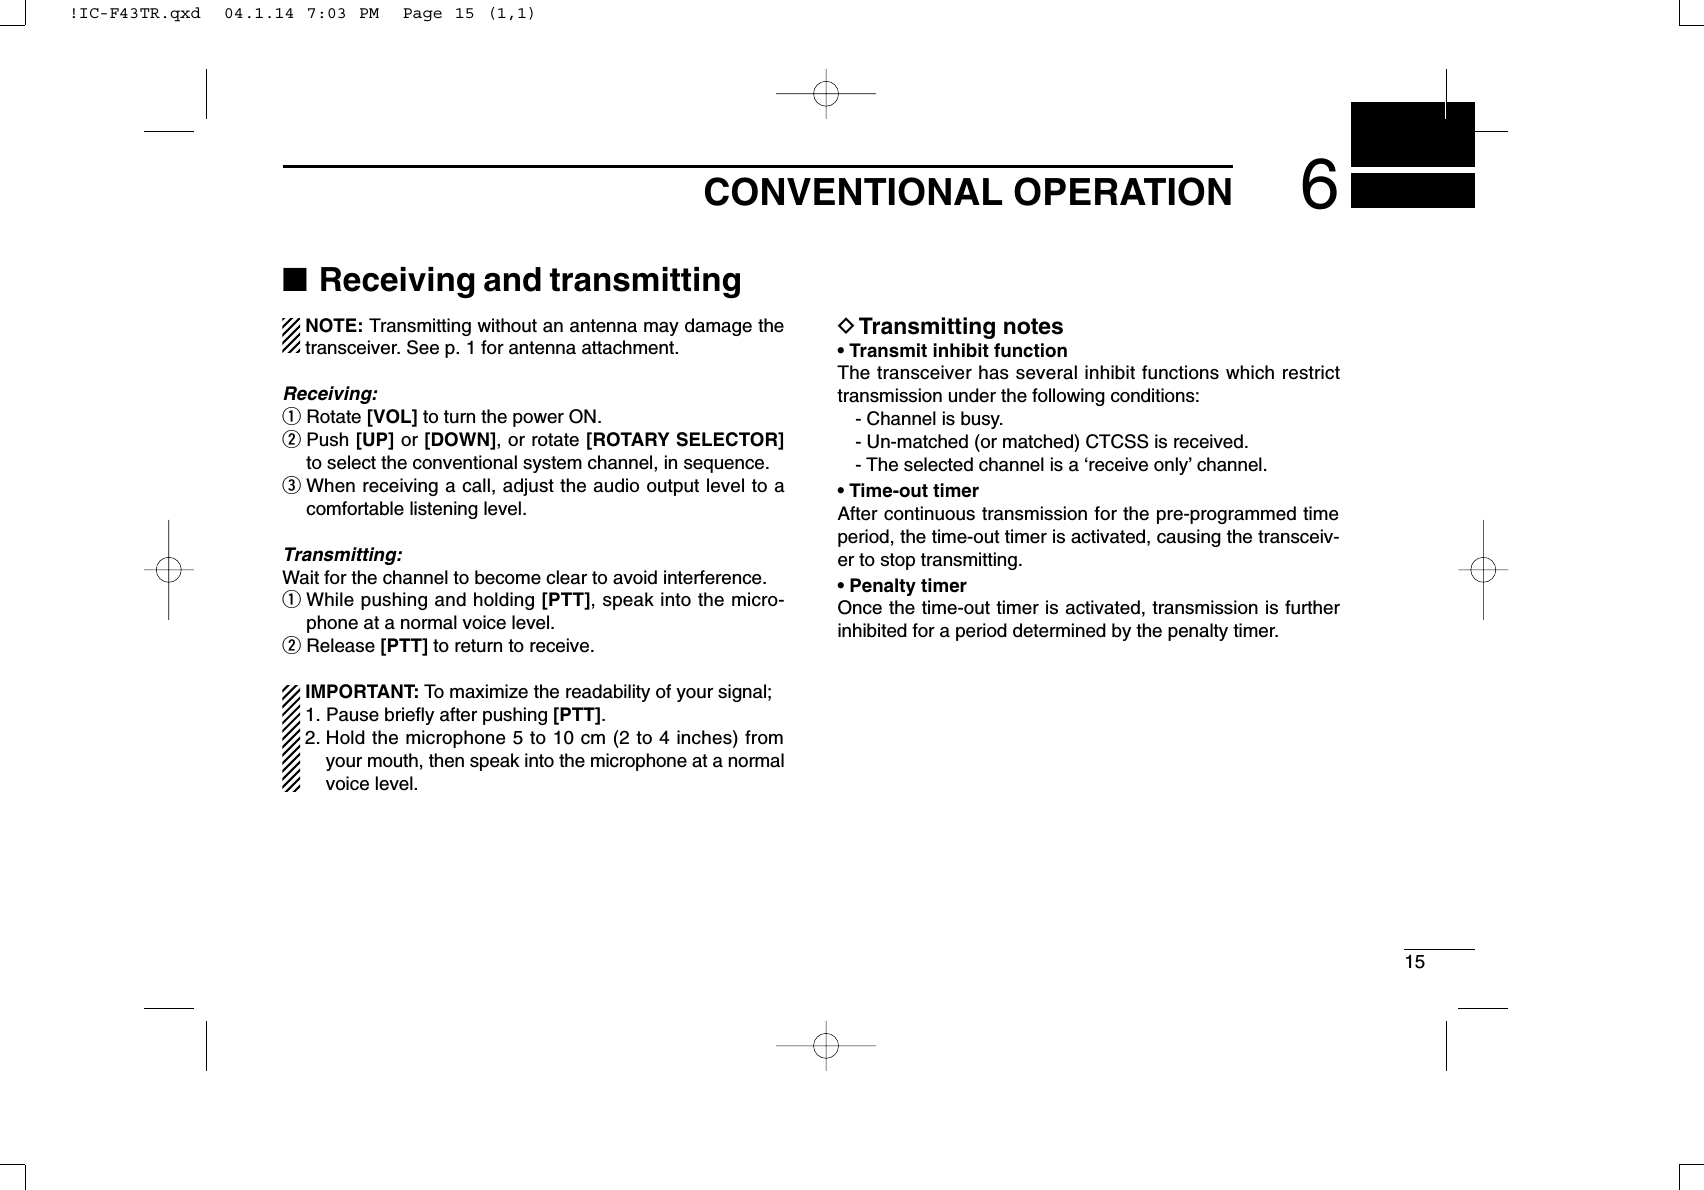 156CONVENTIONAL OPERATION■Receiving and transmittingNOTE: Transmitting without an antenna may damage thetransceiver. See p. 1 for antenna attachment.Receiving:qRotate [VOL] to turn the power ON.wPush [UP] or [DOWN], or rotate [ROTARY SELECTOR]to select the conventional system channel, in sequence.eWhen receiving a call, adjust the audio output level to acomfortable listening level.Transmitting:Wait for the channel to become clear to avoid interference.qWhile pushing and holding [PTT], speak into the micro-phone at a normal voice level.wRelease [PTT] to return to receive.IMPORTANT: To maximize the readability of your signal;1. Pause brieﬂy after pushing [PTT].2. Hold the microphone 5 to 10 cm (2 to 4 inches) fromyour mouth, then speak into the microphone at a normalvoice level.DTransmitting notes• Transmit inhibit functionThe transceiver has several inhibit functions which restricttransmission under the following conditions:- Channel is busy.- Un-matched (or matched) CTCSS is received.- The selected channel is a ‘receive only’channel.• Time-out timerAfter continuous transmission for the pre-programmed timeperiod, the time-out timer is activated, causing the transceiv-er to stop transmitting.• Penalty timerOnce the time-out timer is activated, transmission is furtherinhibited for a period determined by the penalty timer.!IC-F43TR.qxd  04.1.14 7:03 PM  Page 15 (1,1)